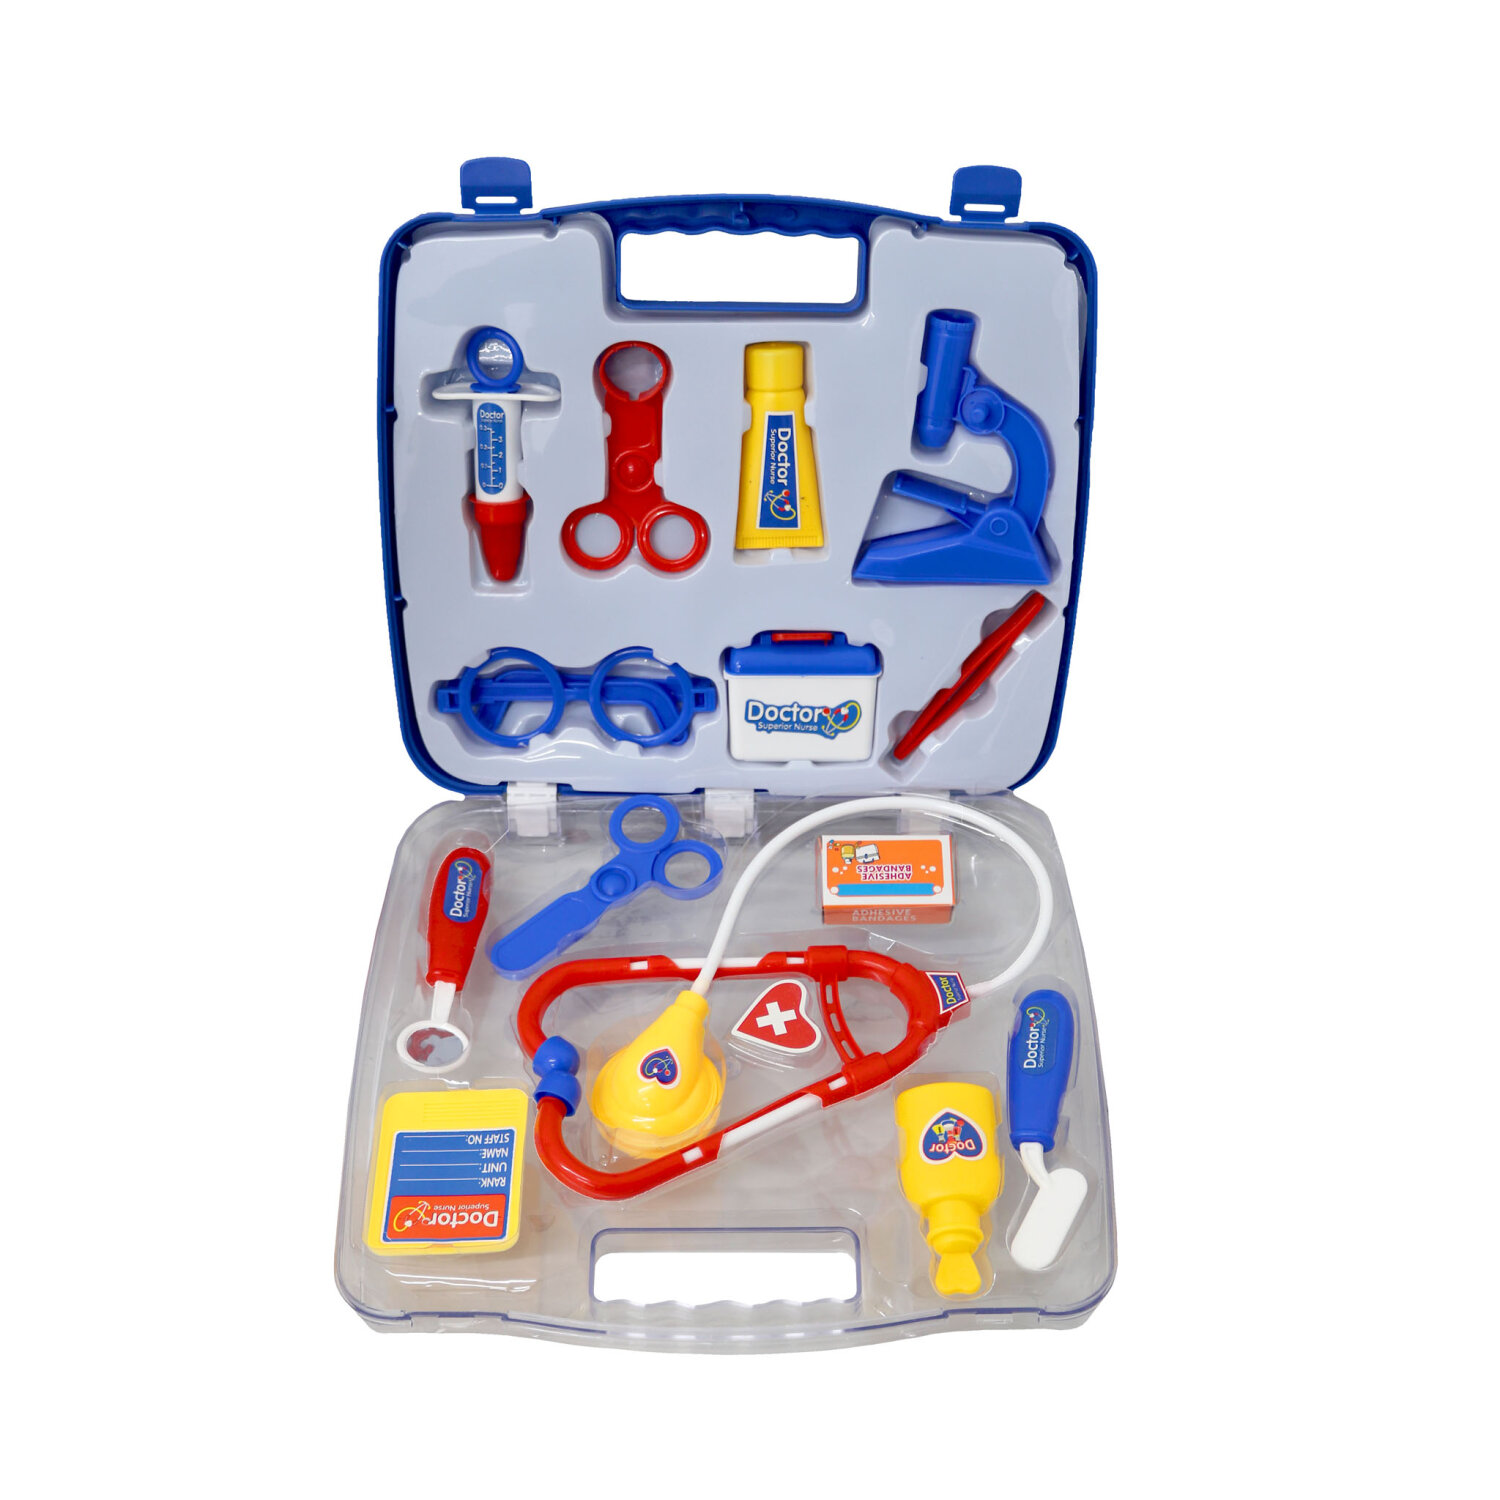 Papillon Gift Medical Medic Doctor Set Nurse Kit Kids Toy Role Play Carry Case by 1373116 